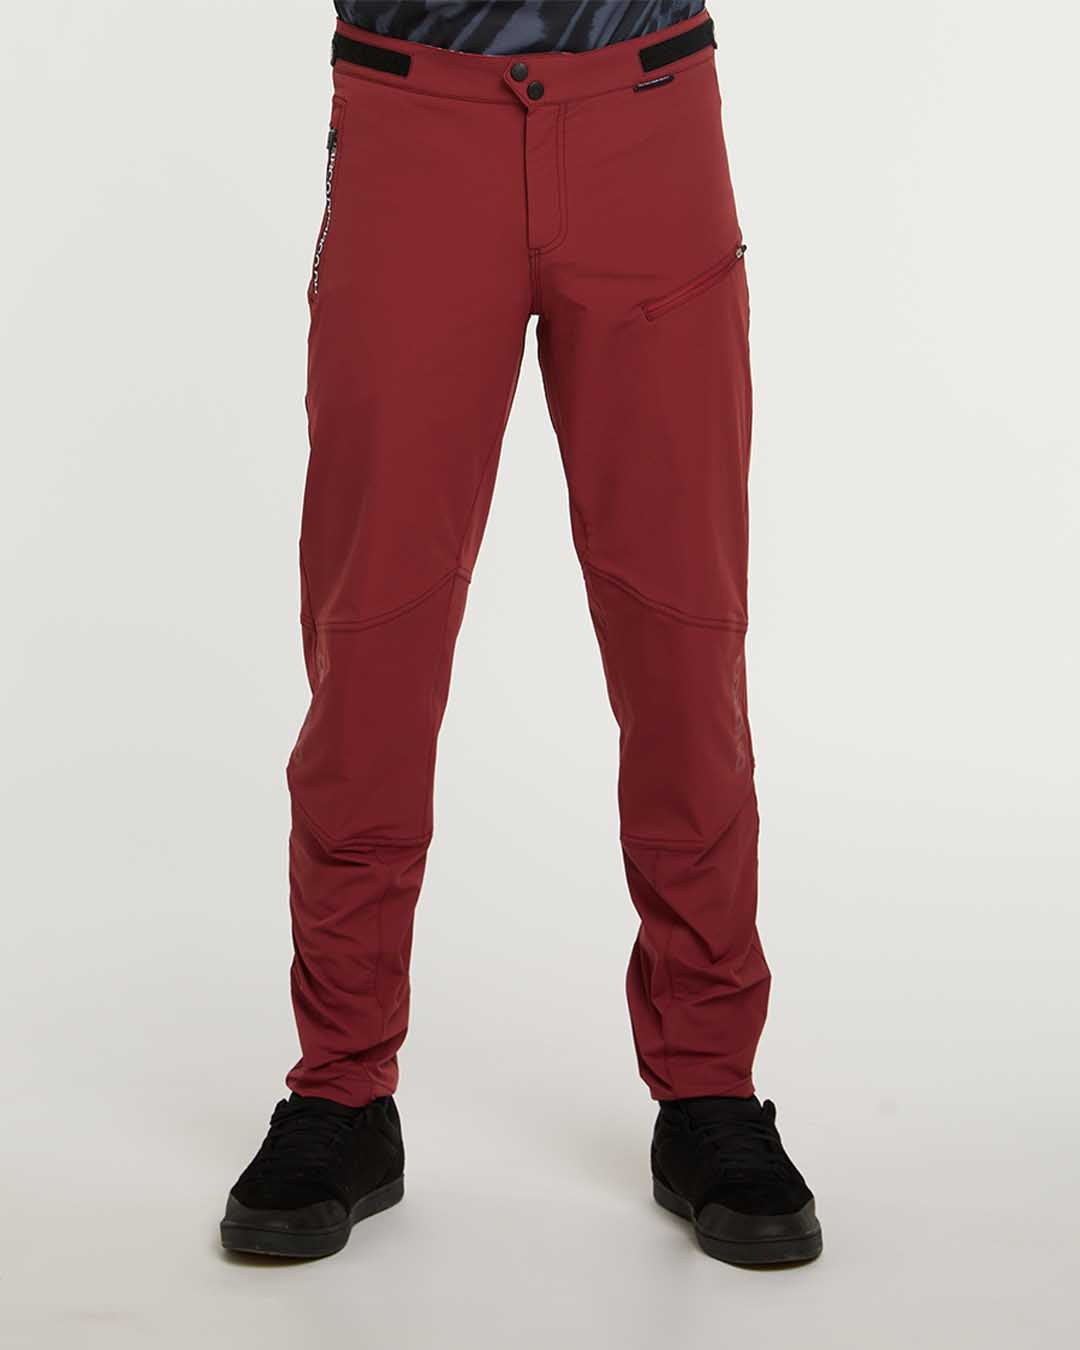 OUTFIT / THE DRESS PANT JOGGER PANTS - RED REIDING HOODRED REIDING HOOD